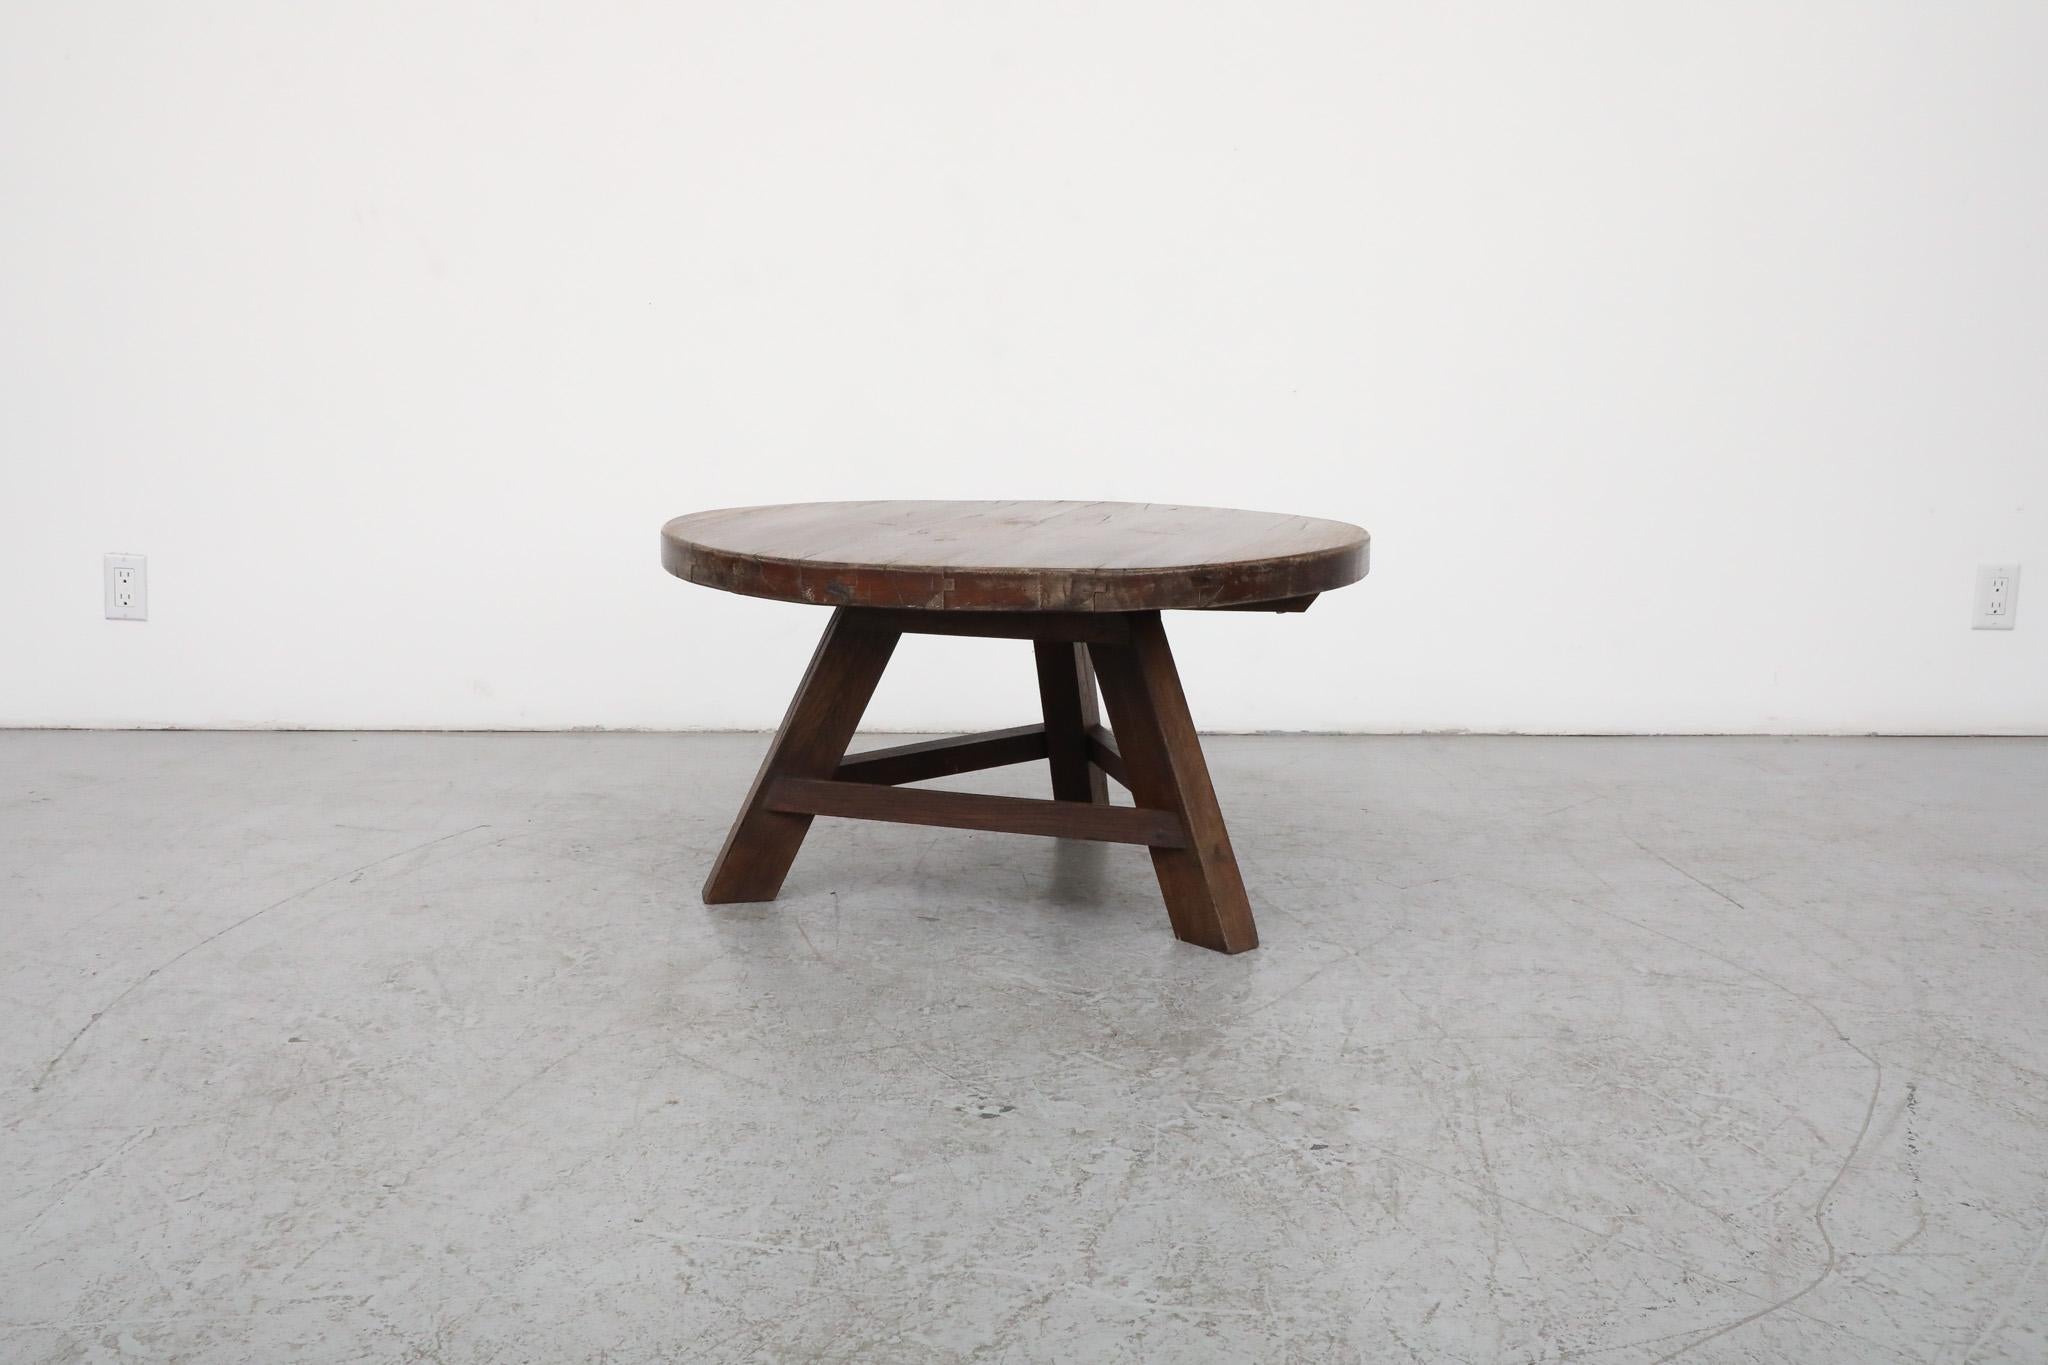 This Mid-Century, Brutalist, Pierre Chapo inspired solid oak side or coffee table is outfitted with a handsome and generous round top as well as a tripod style trestle base. It is in original condition with some visible wear, including some natural